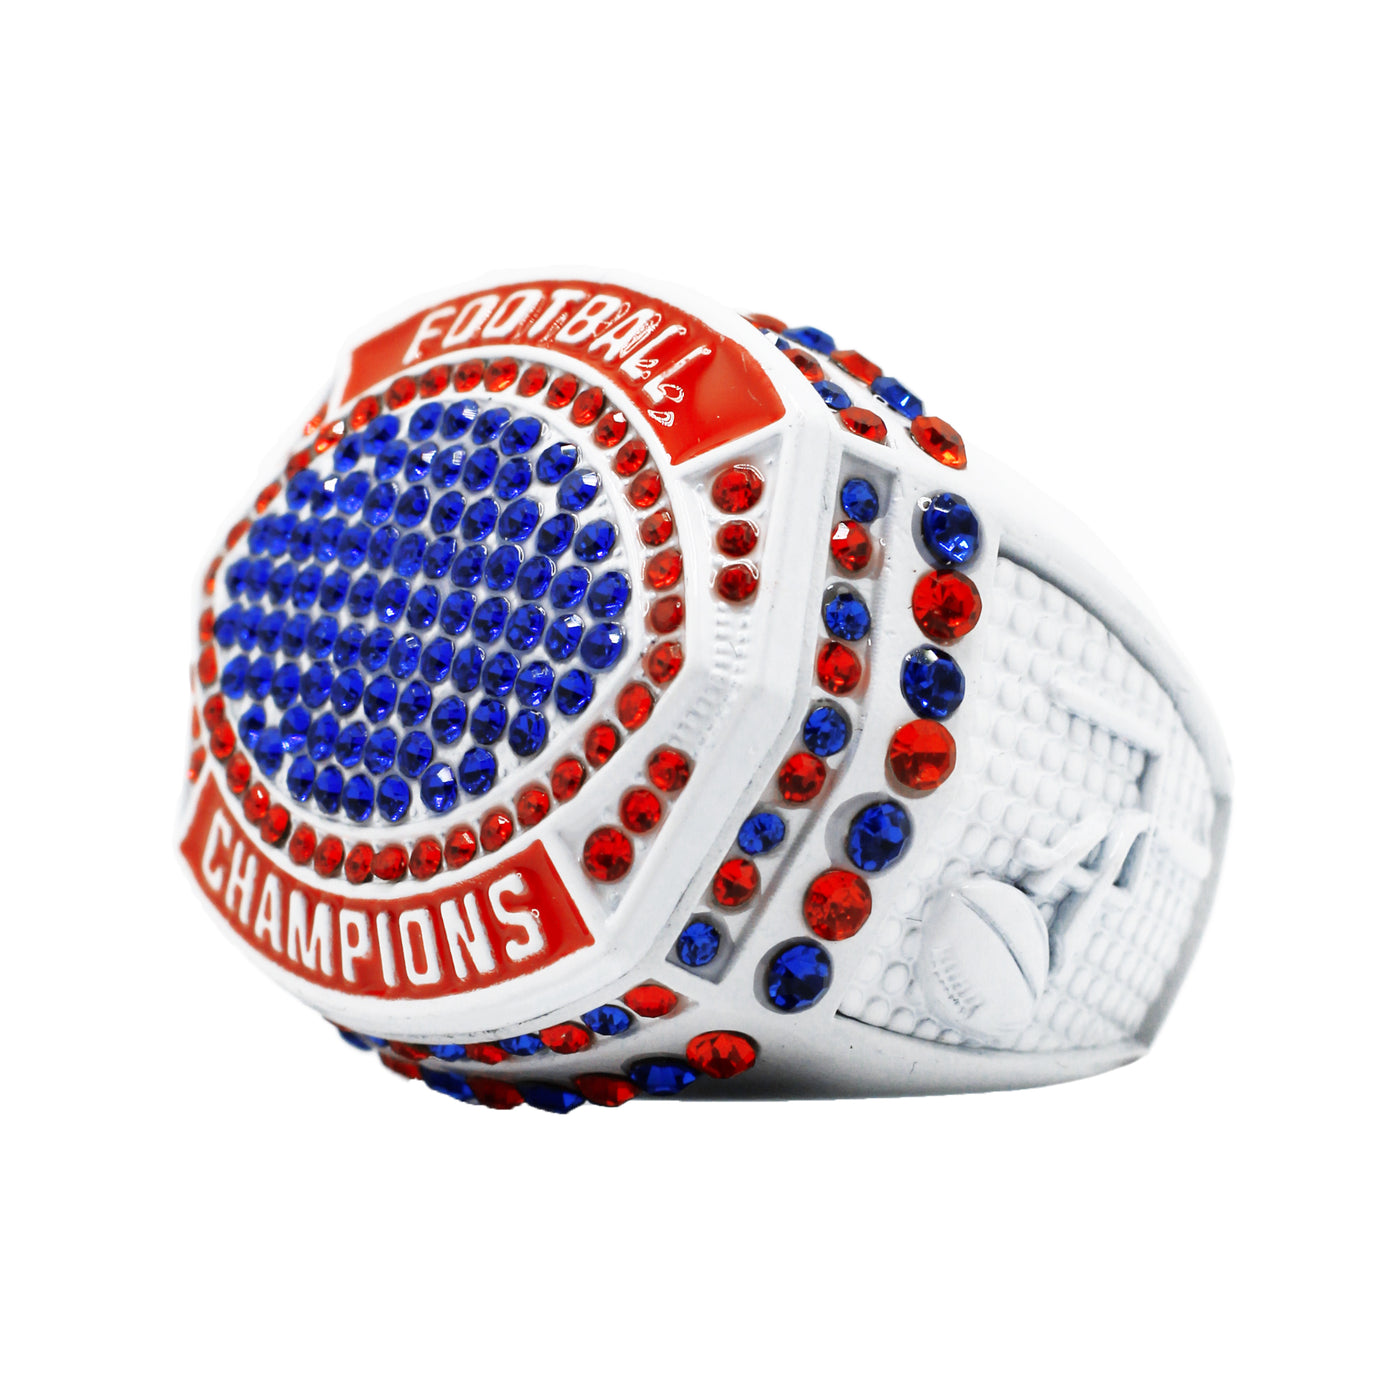 FOOTBALL24 WHITEOUT CHAMPIONS RING